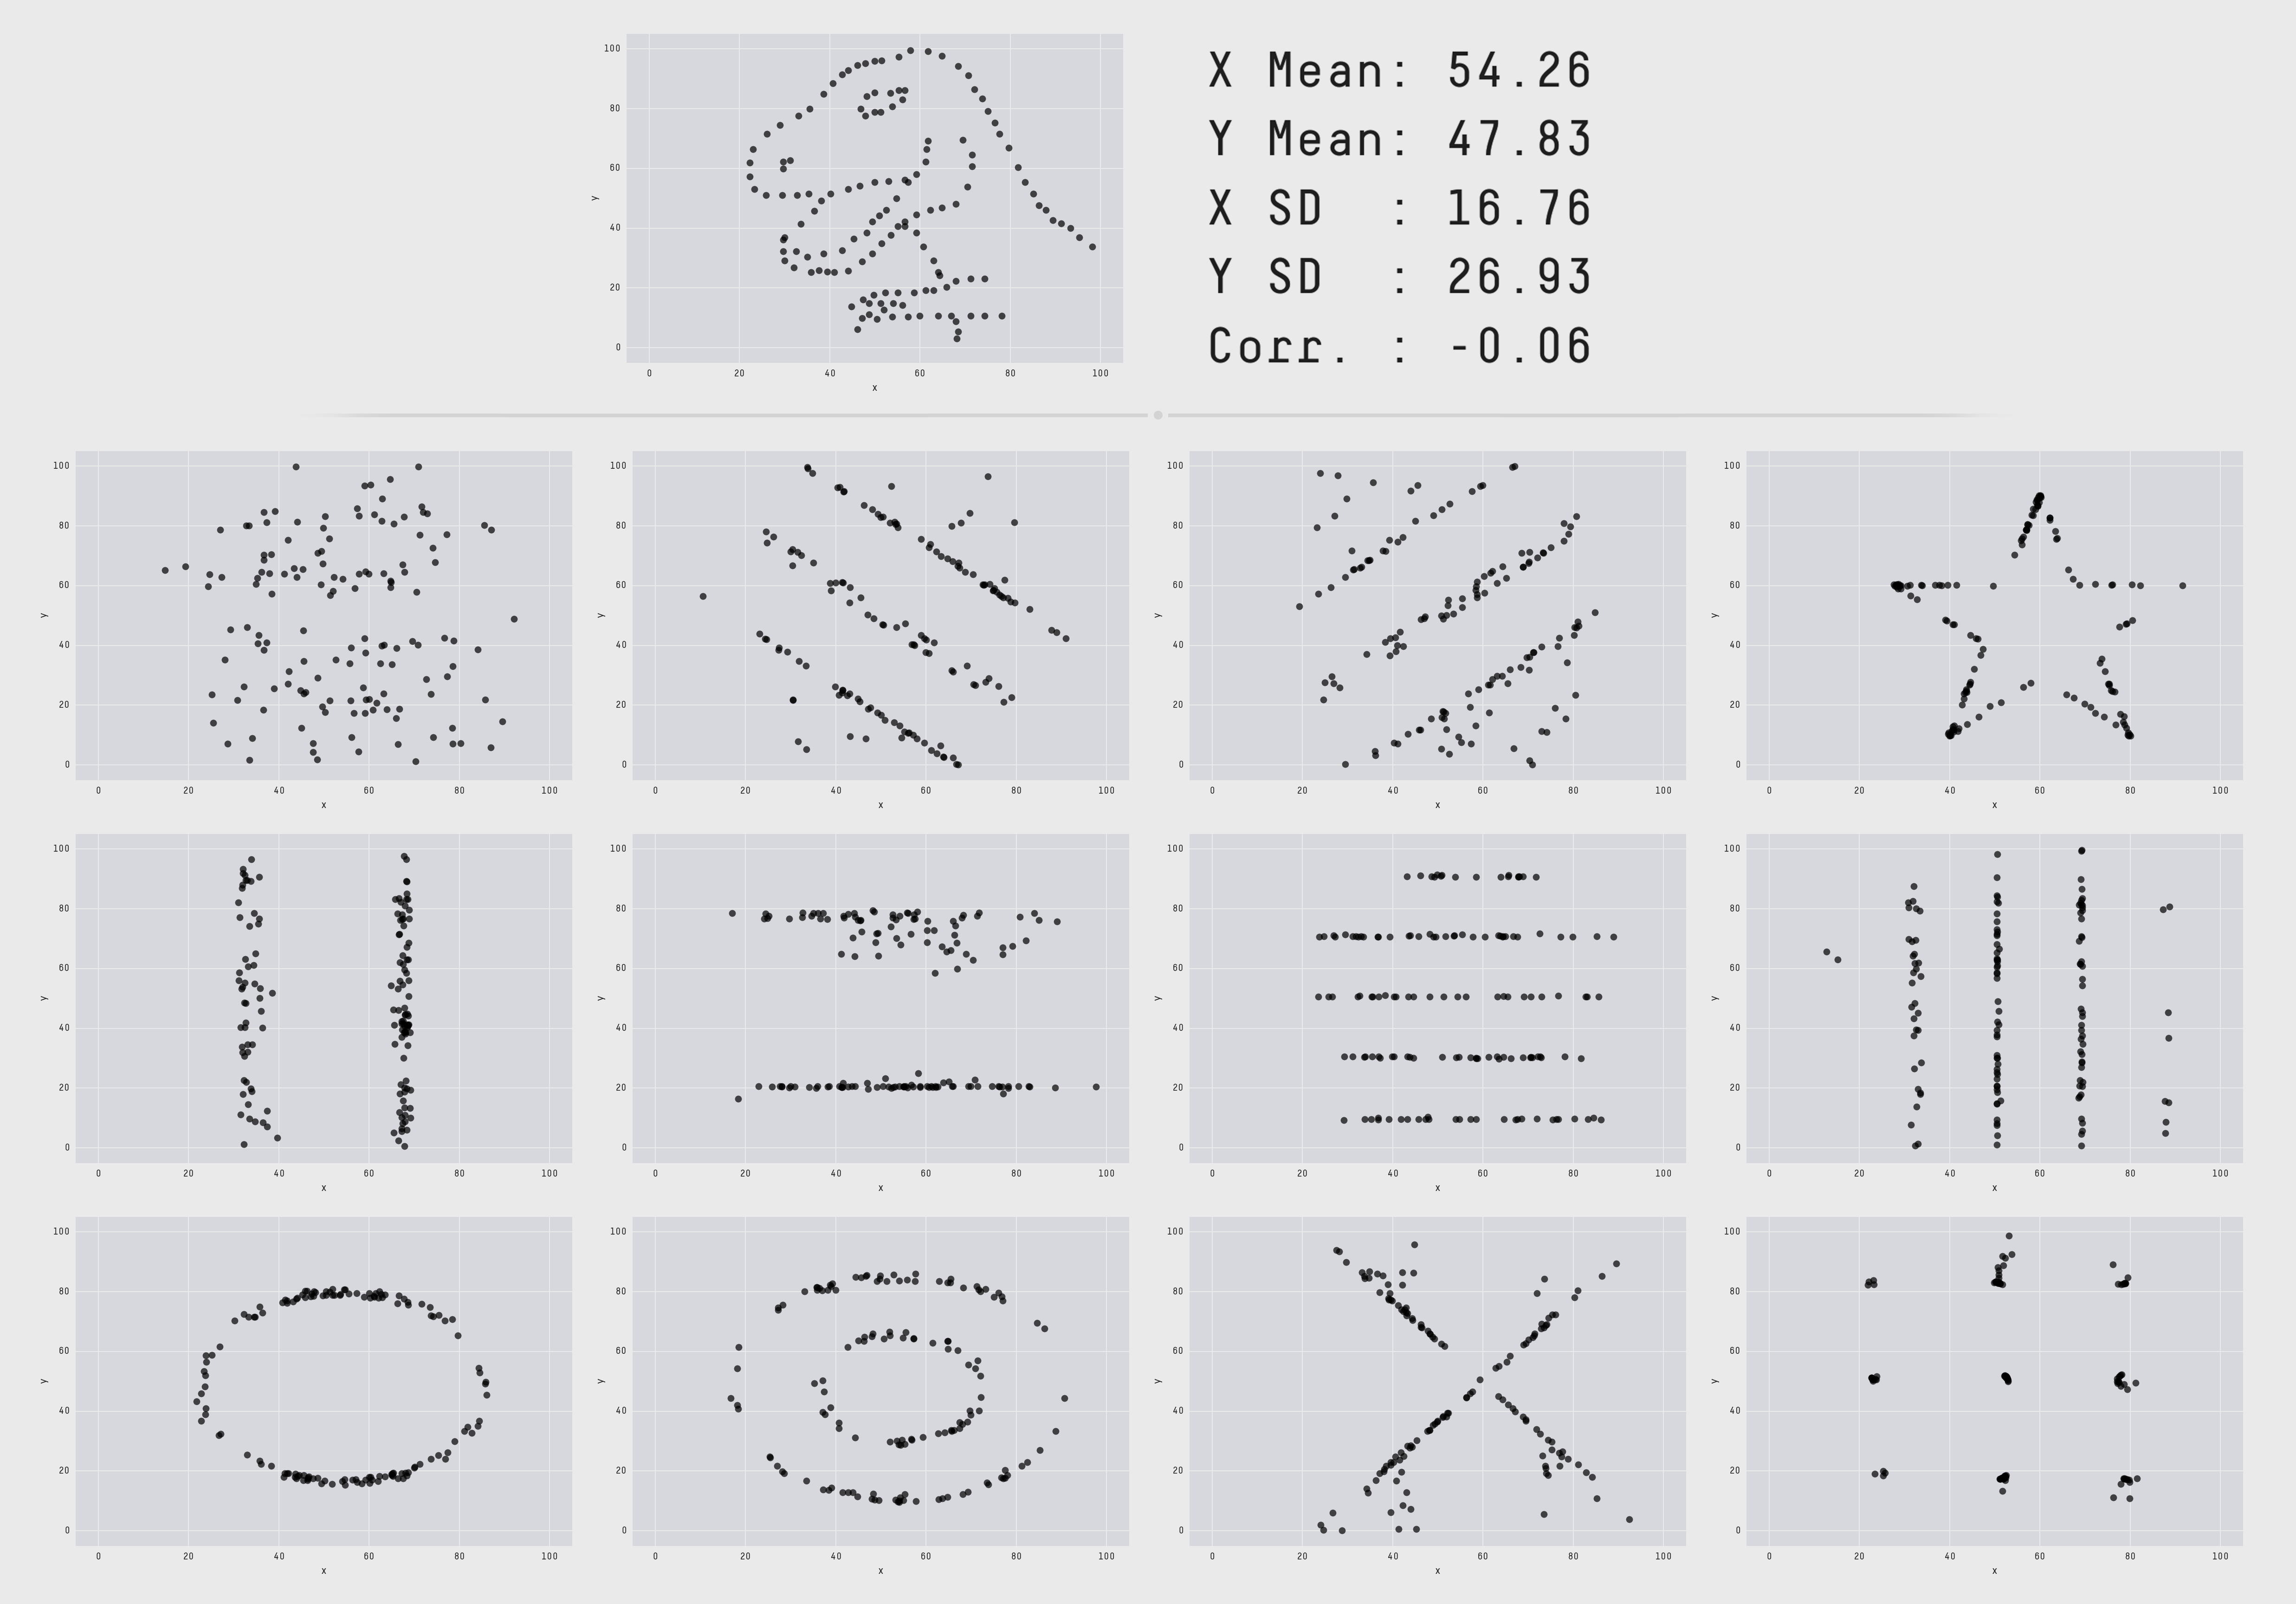 __The Datasaurus Dozen__. While different in appearance, each dataset has the same summary statistics to two decimal places (mean, standard deviation, and Pearson's correlation).